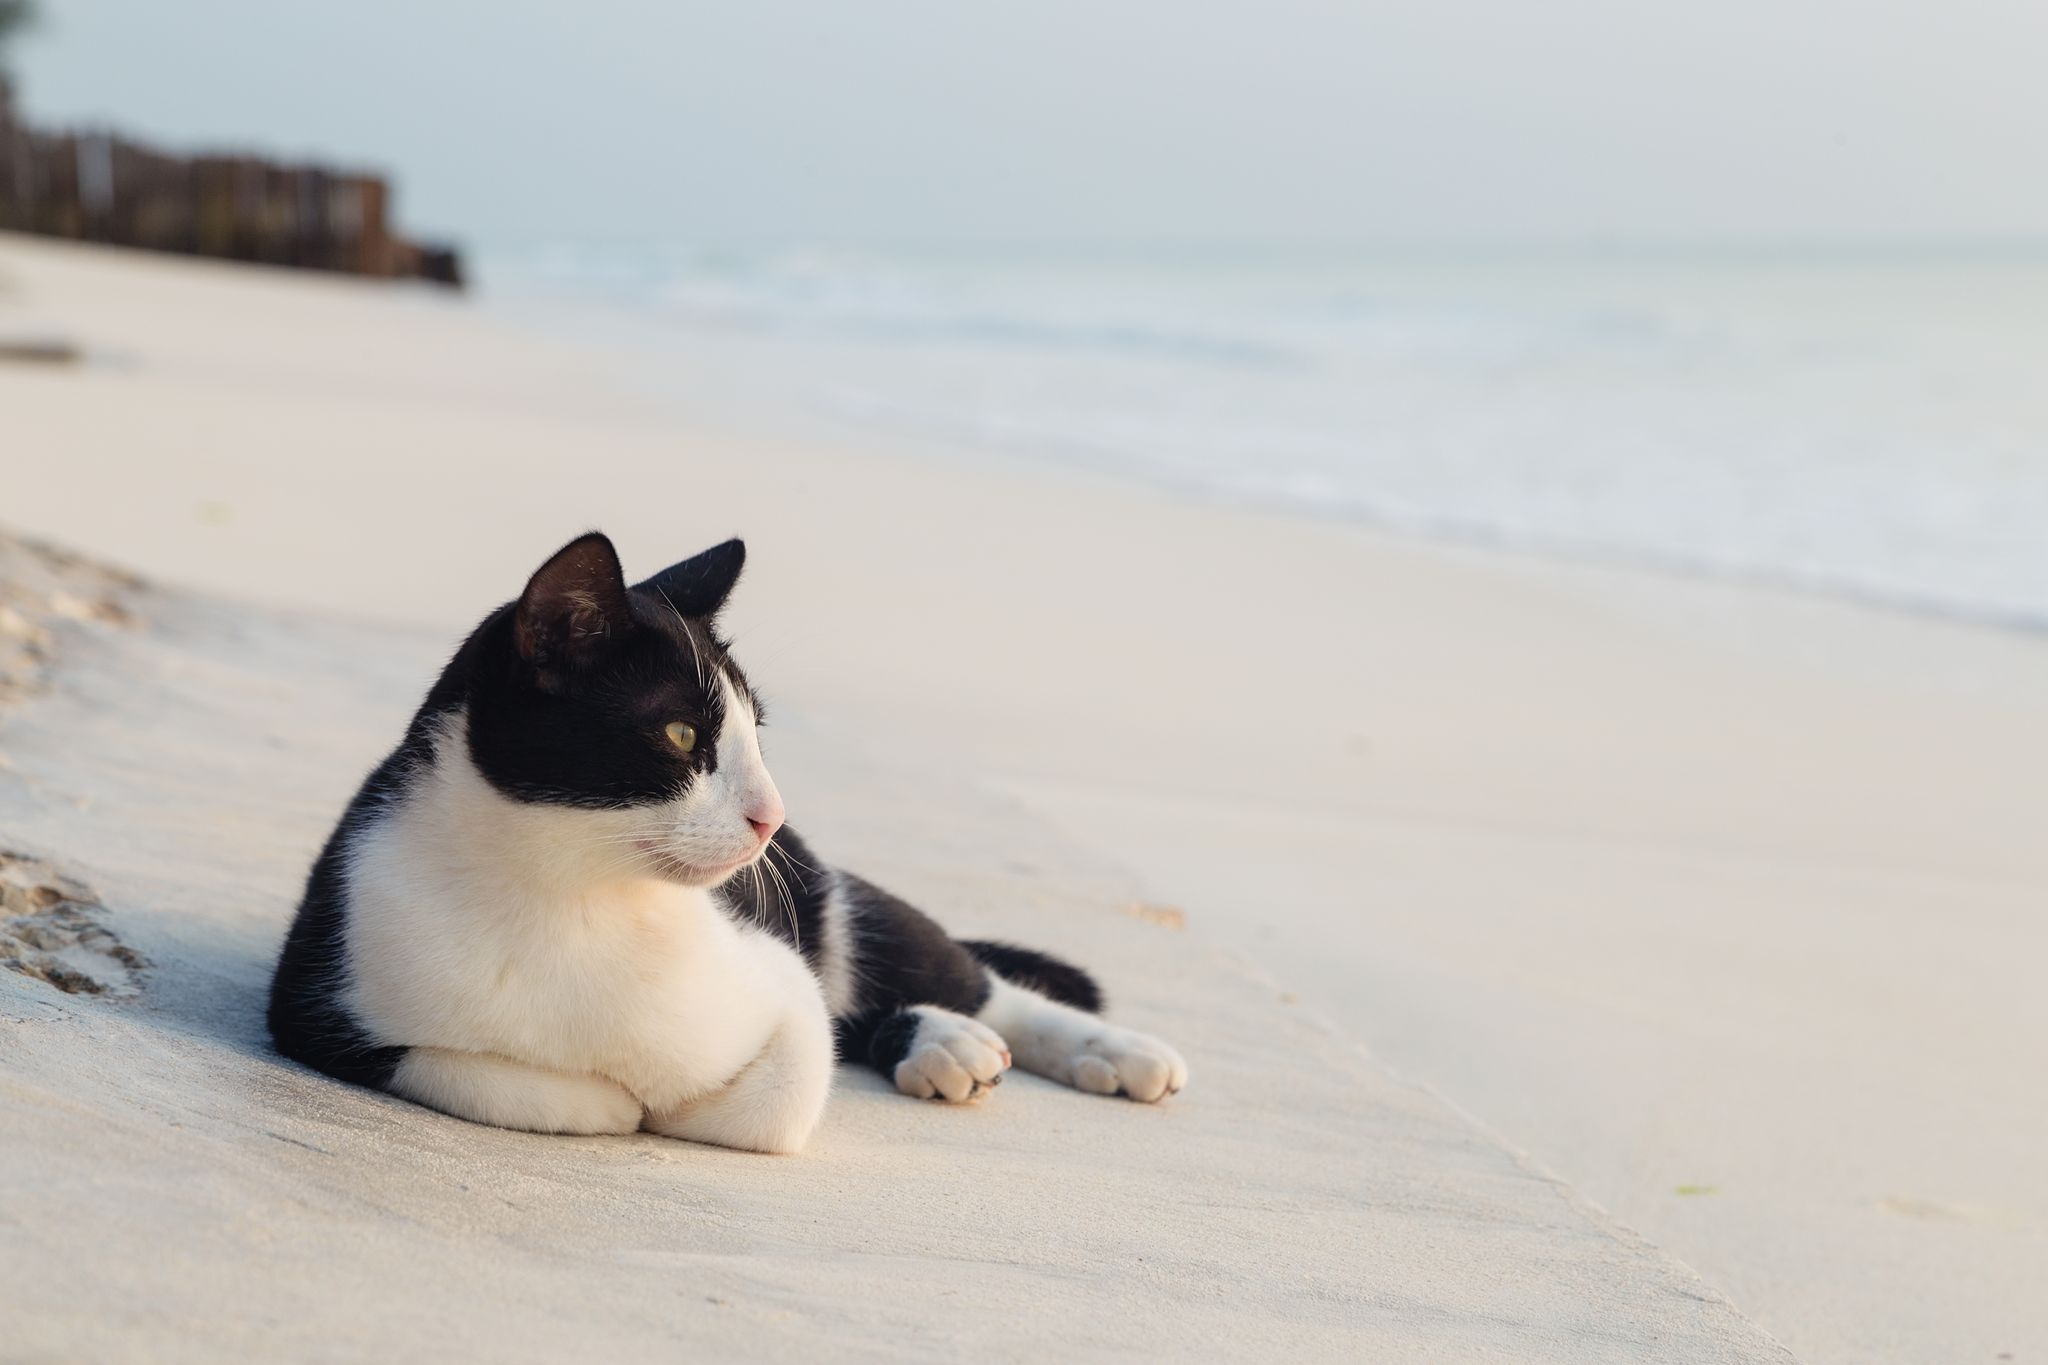 Closeup black and white cat lying on the sand at ocean beach